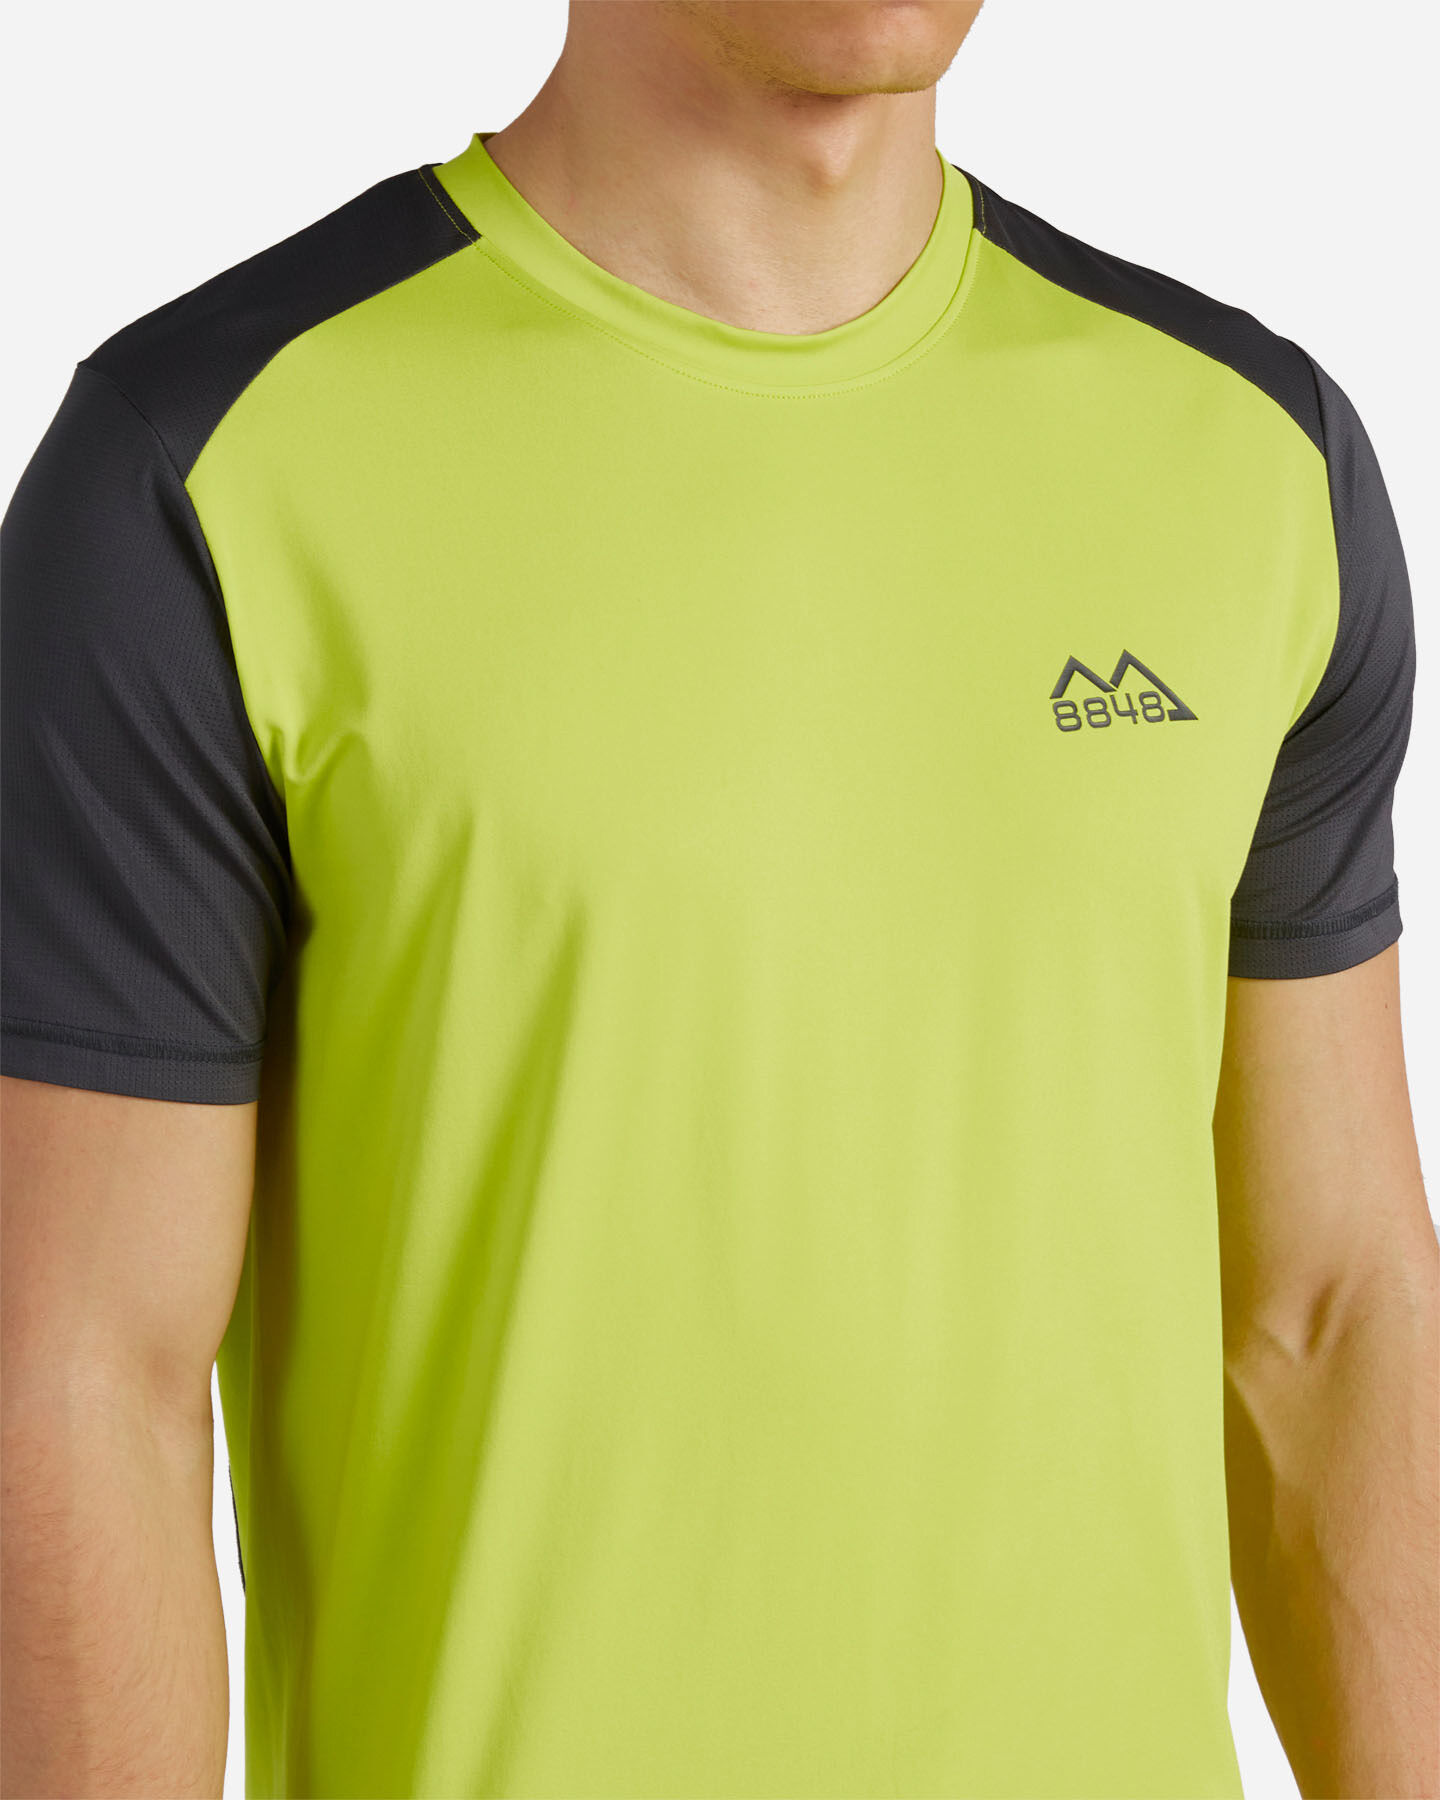  T-Shirt 8848 MOUNTAIN HIKE M S4131157|1063/520|S scatto 4